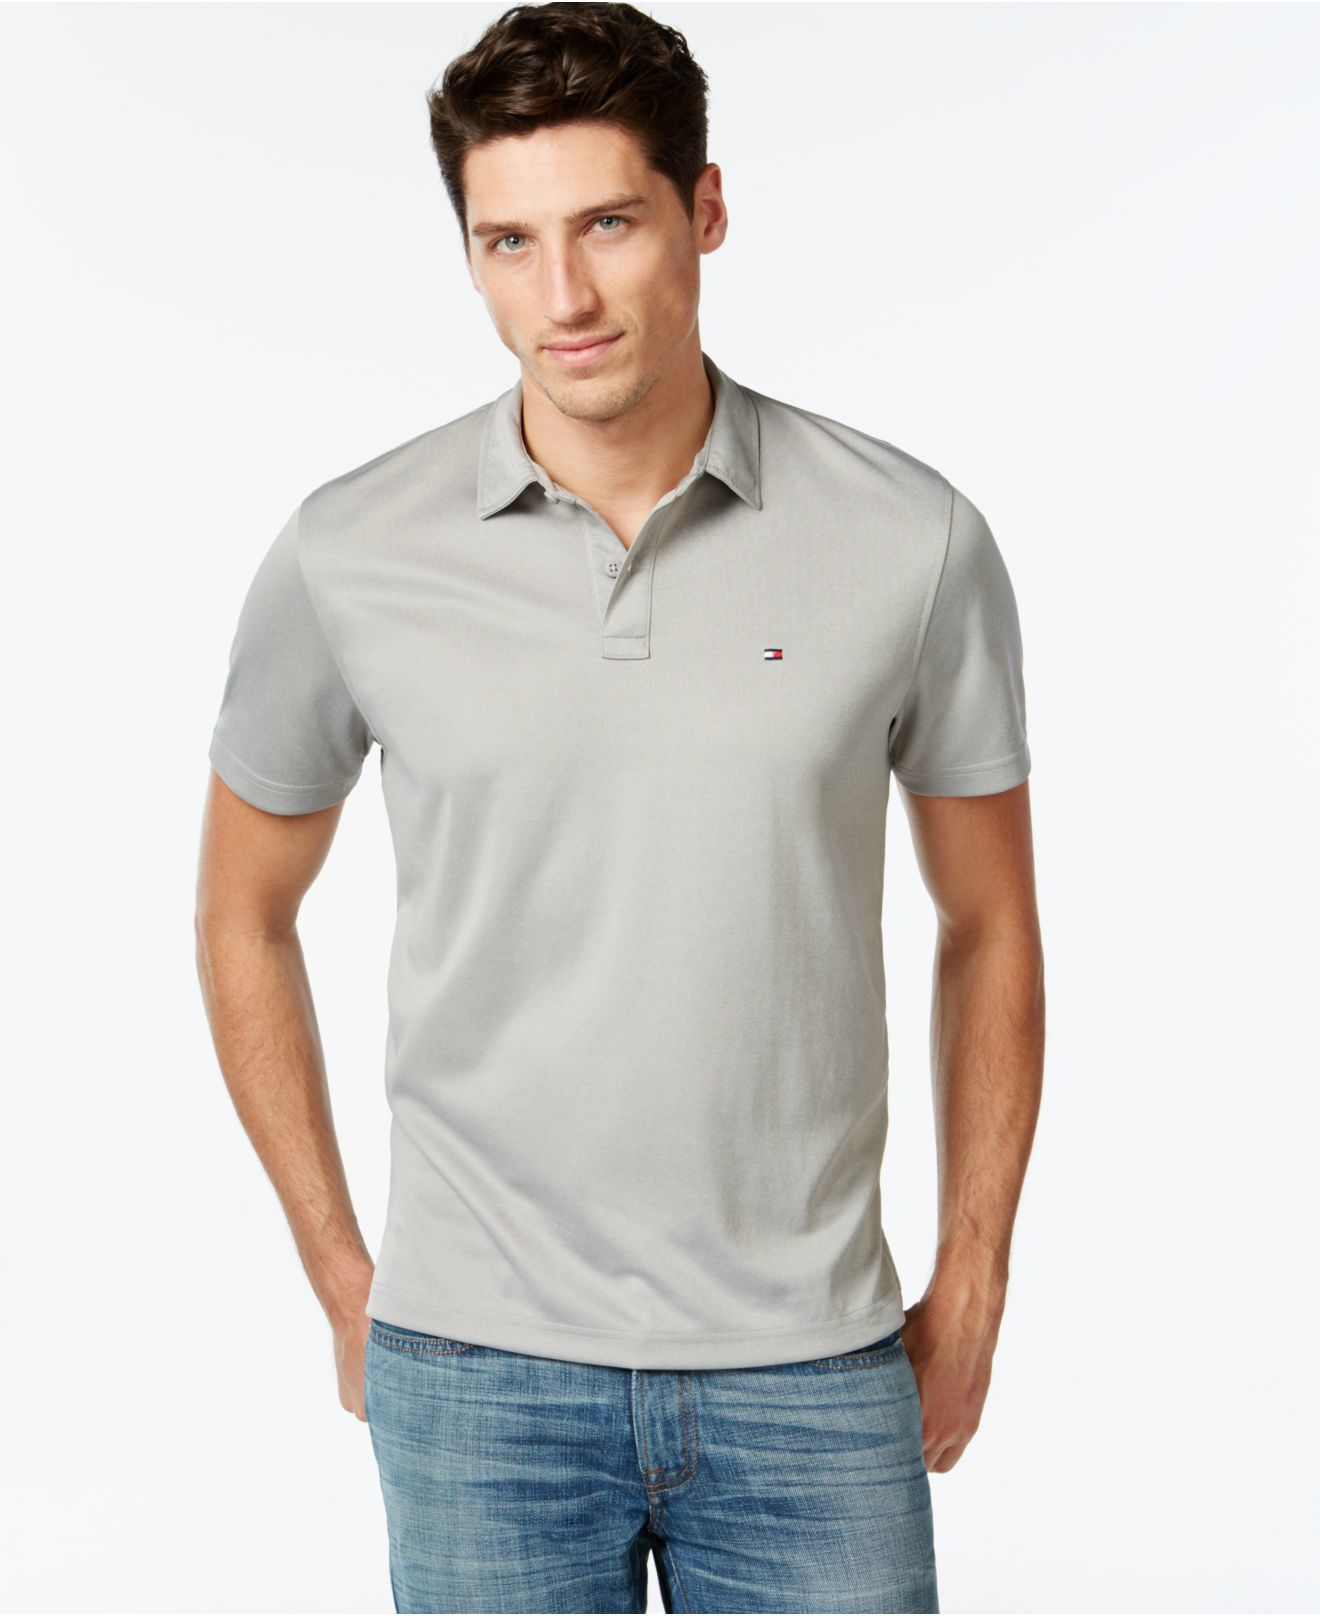 Lyst - Tommy Hilfiger Kansas Solid Performance Polo in Gray for Men